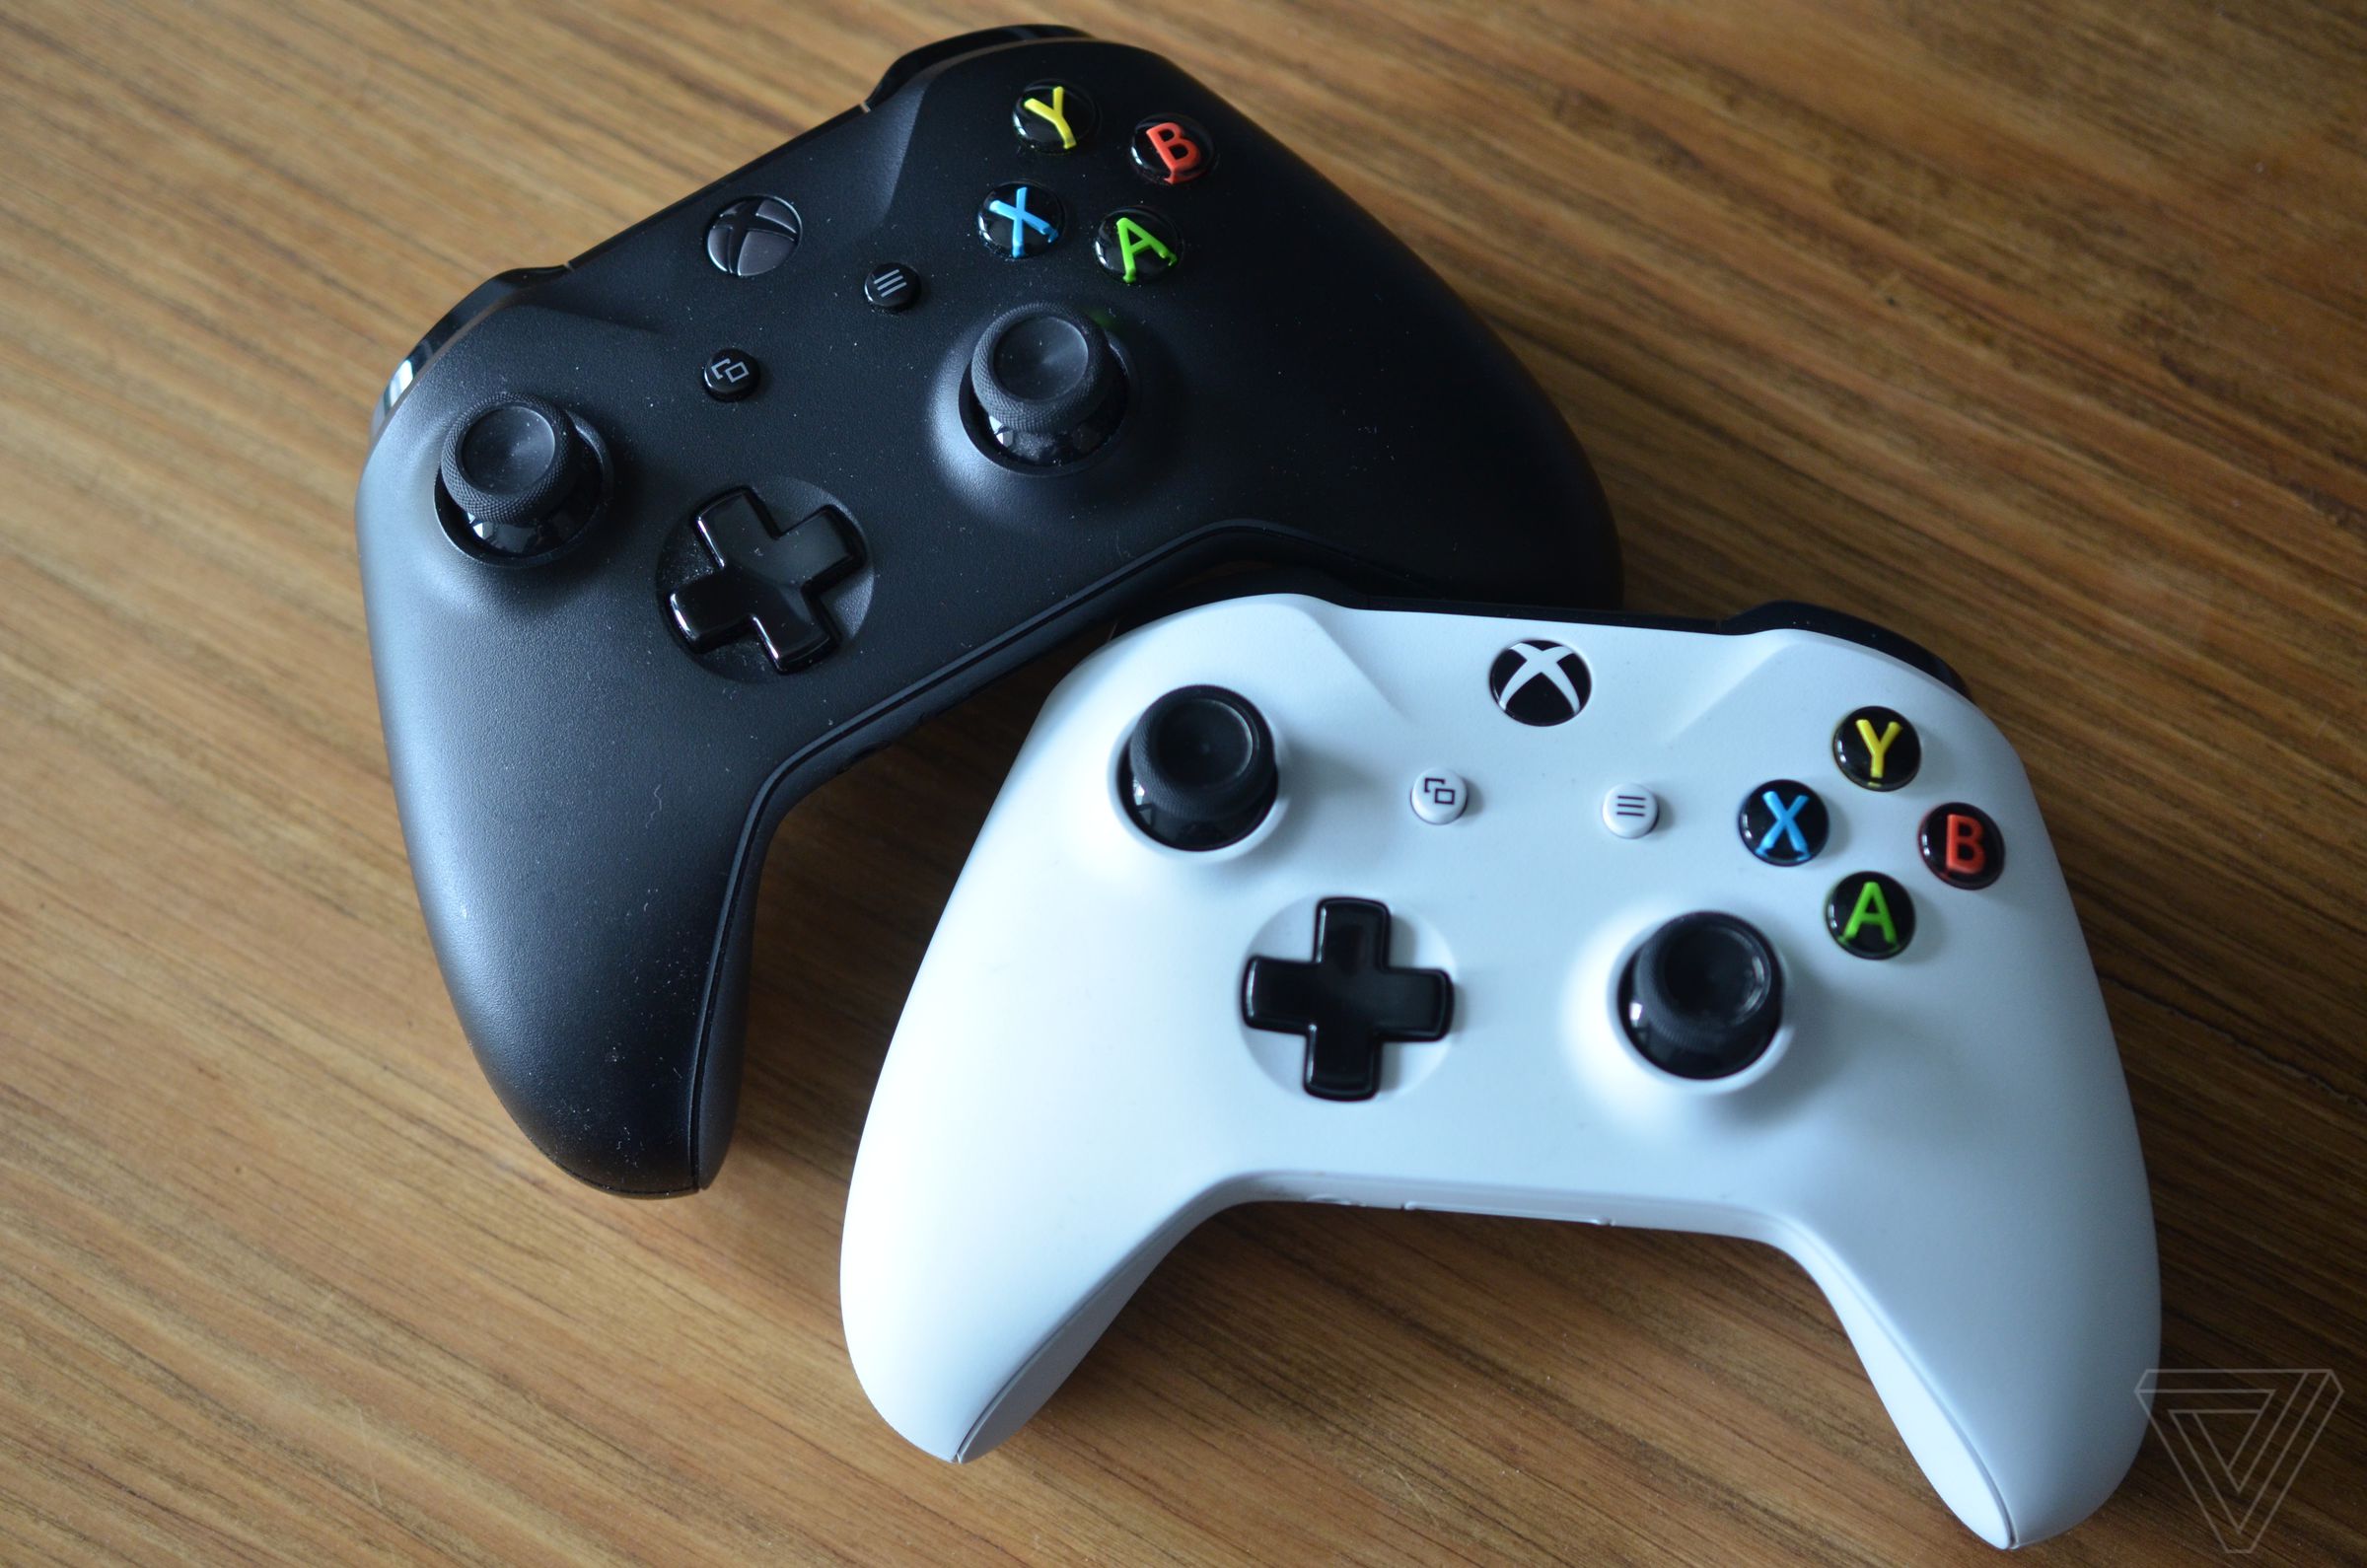 Pick up an Xbox controller for $20 off.